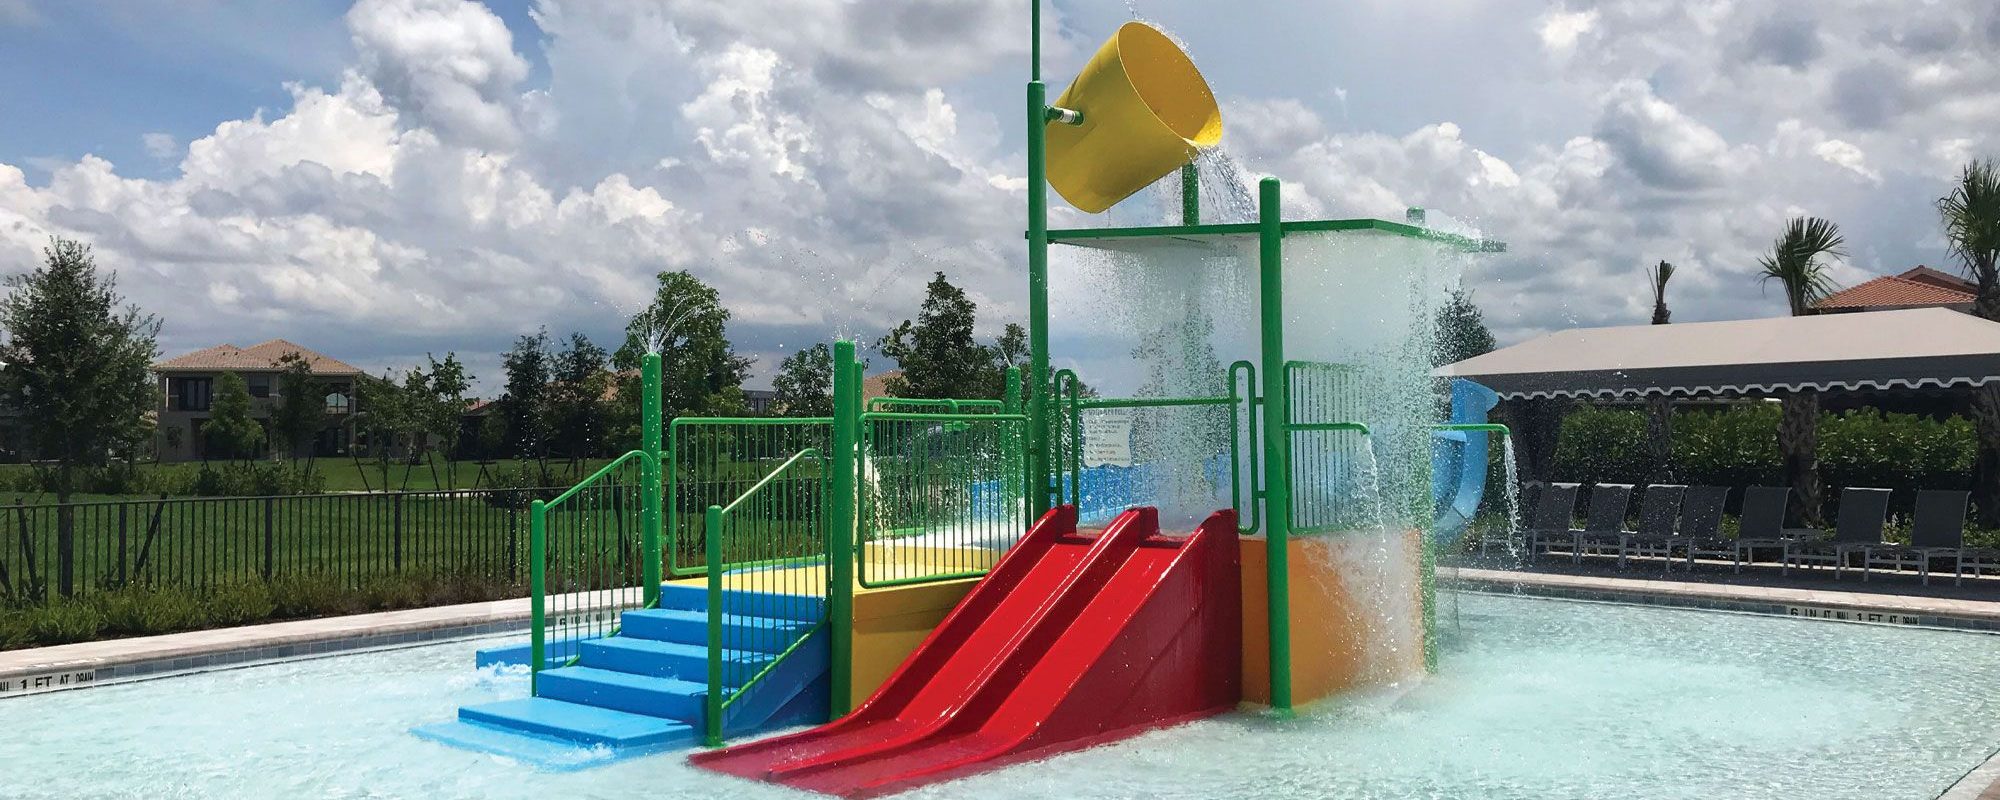 Water Playsets